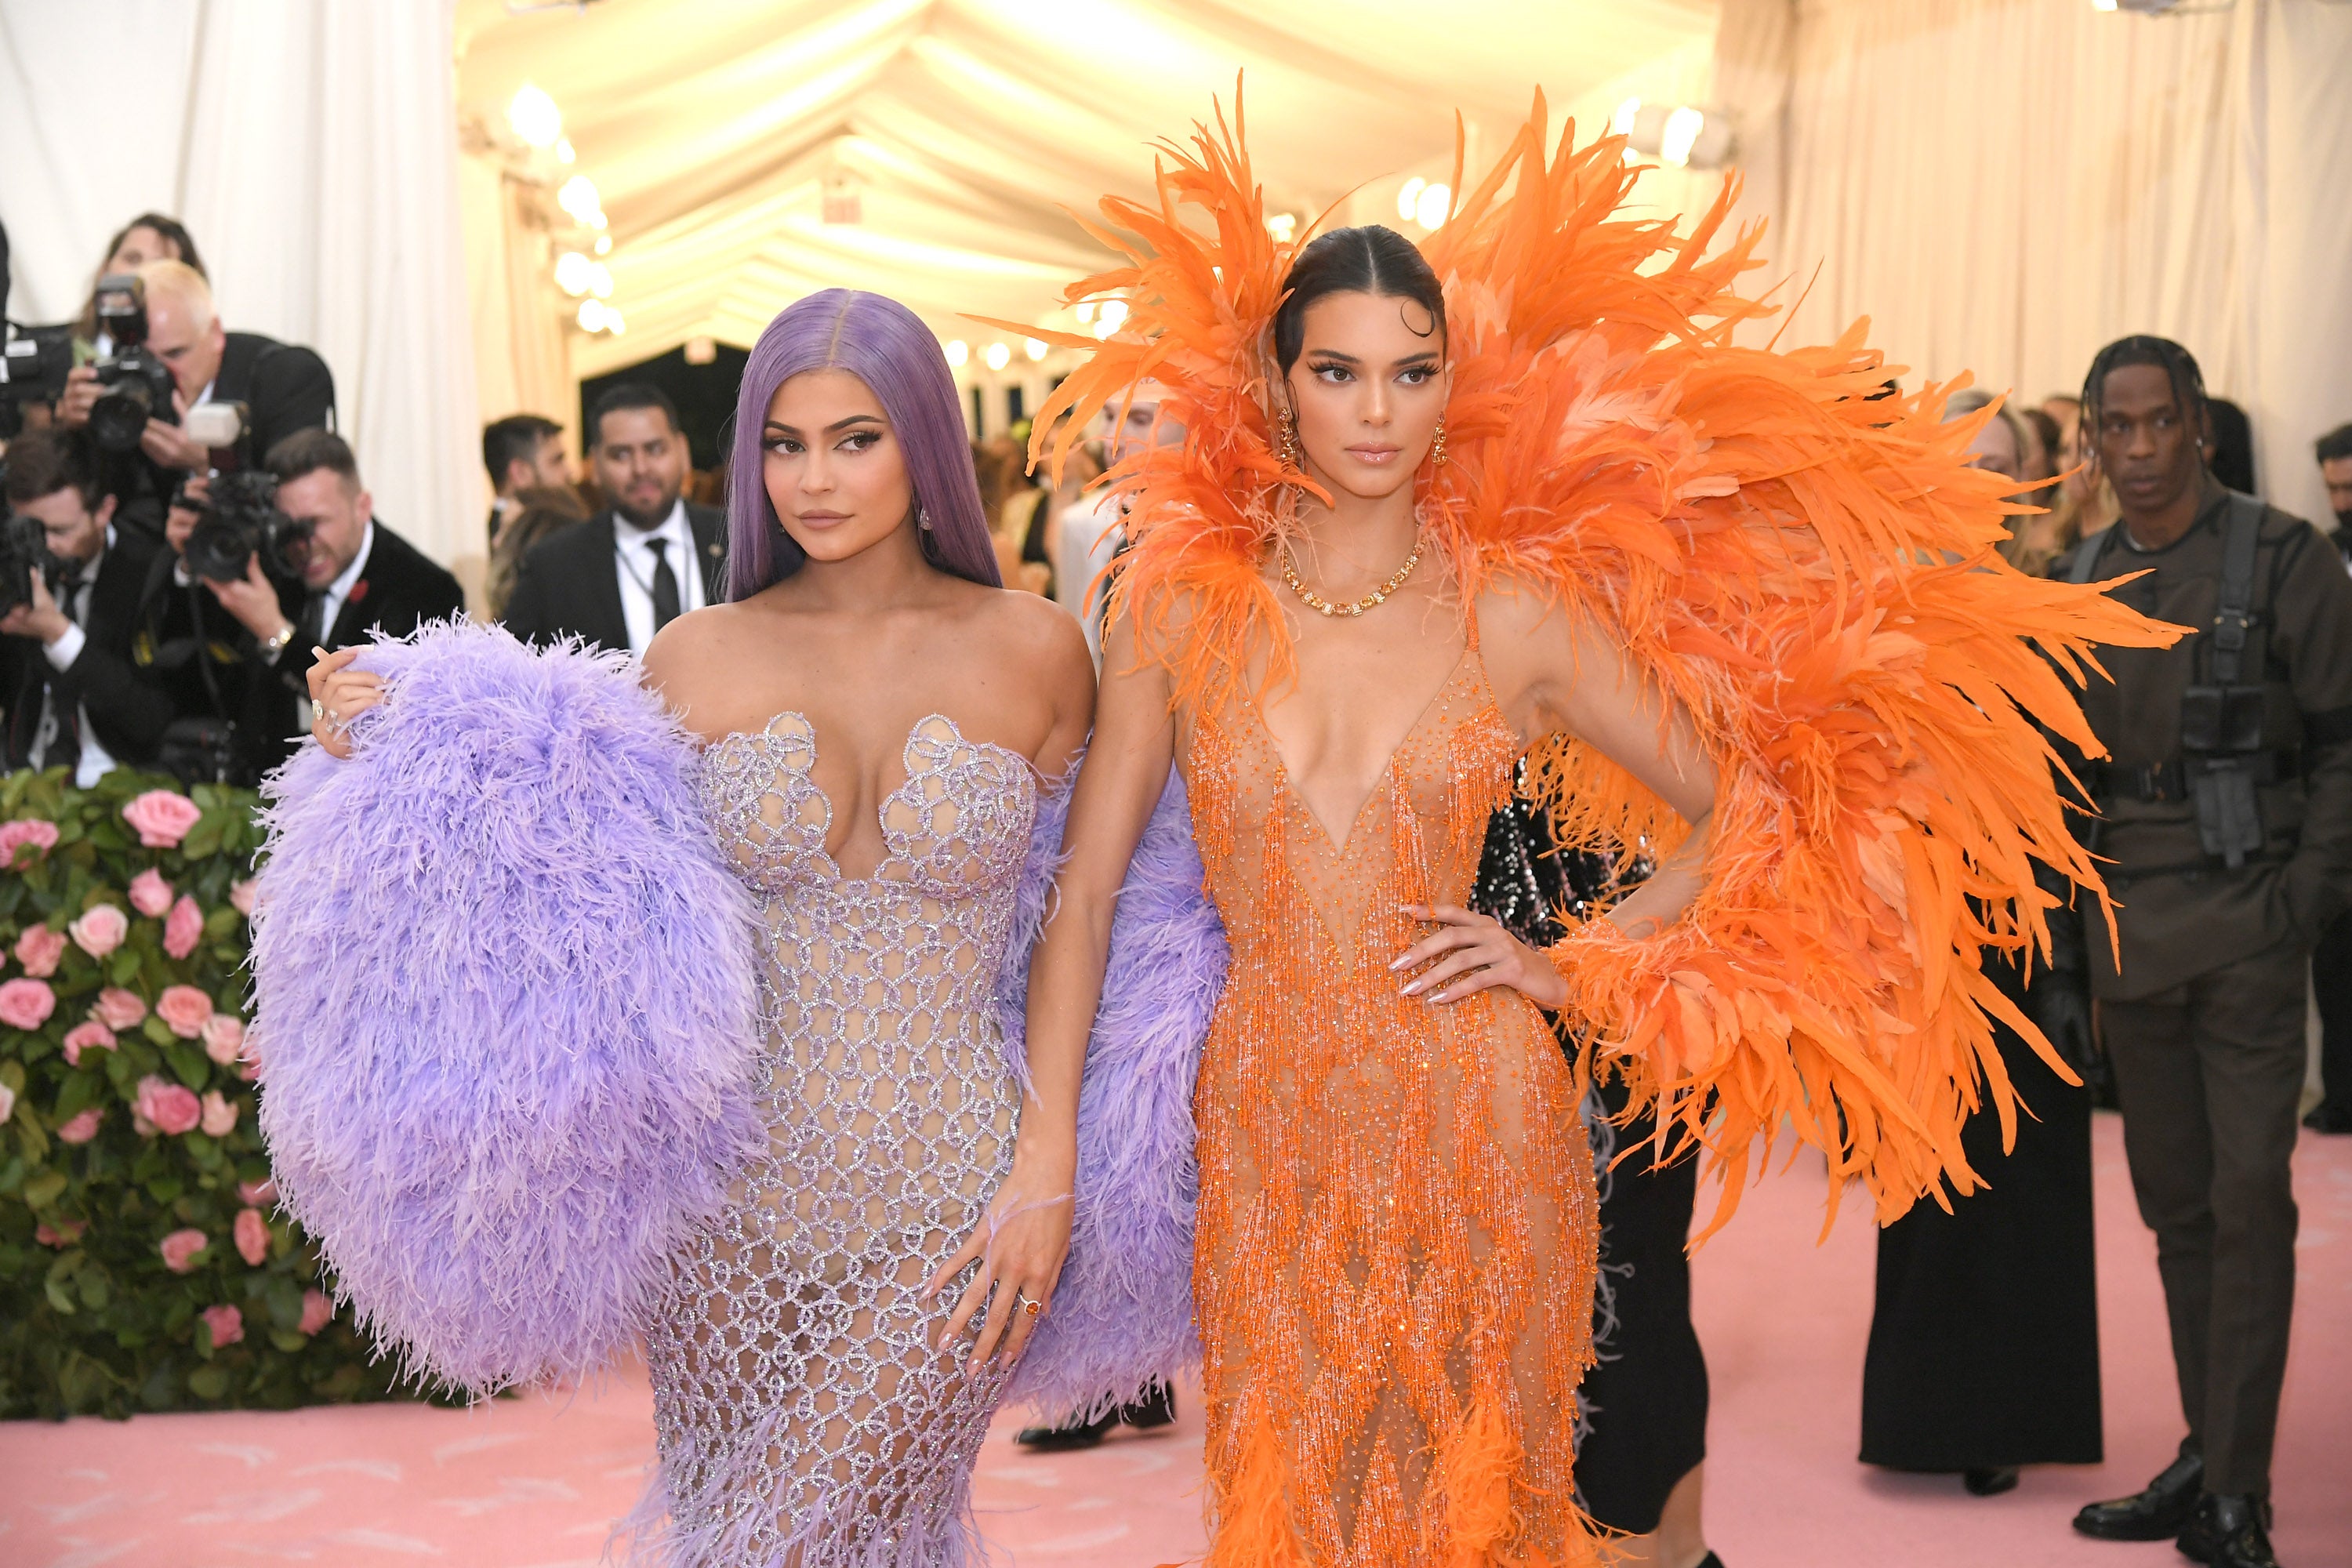 Kylie Jenner and Kendall Jenner attend the 2019 Met Gala